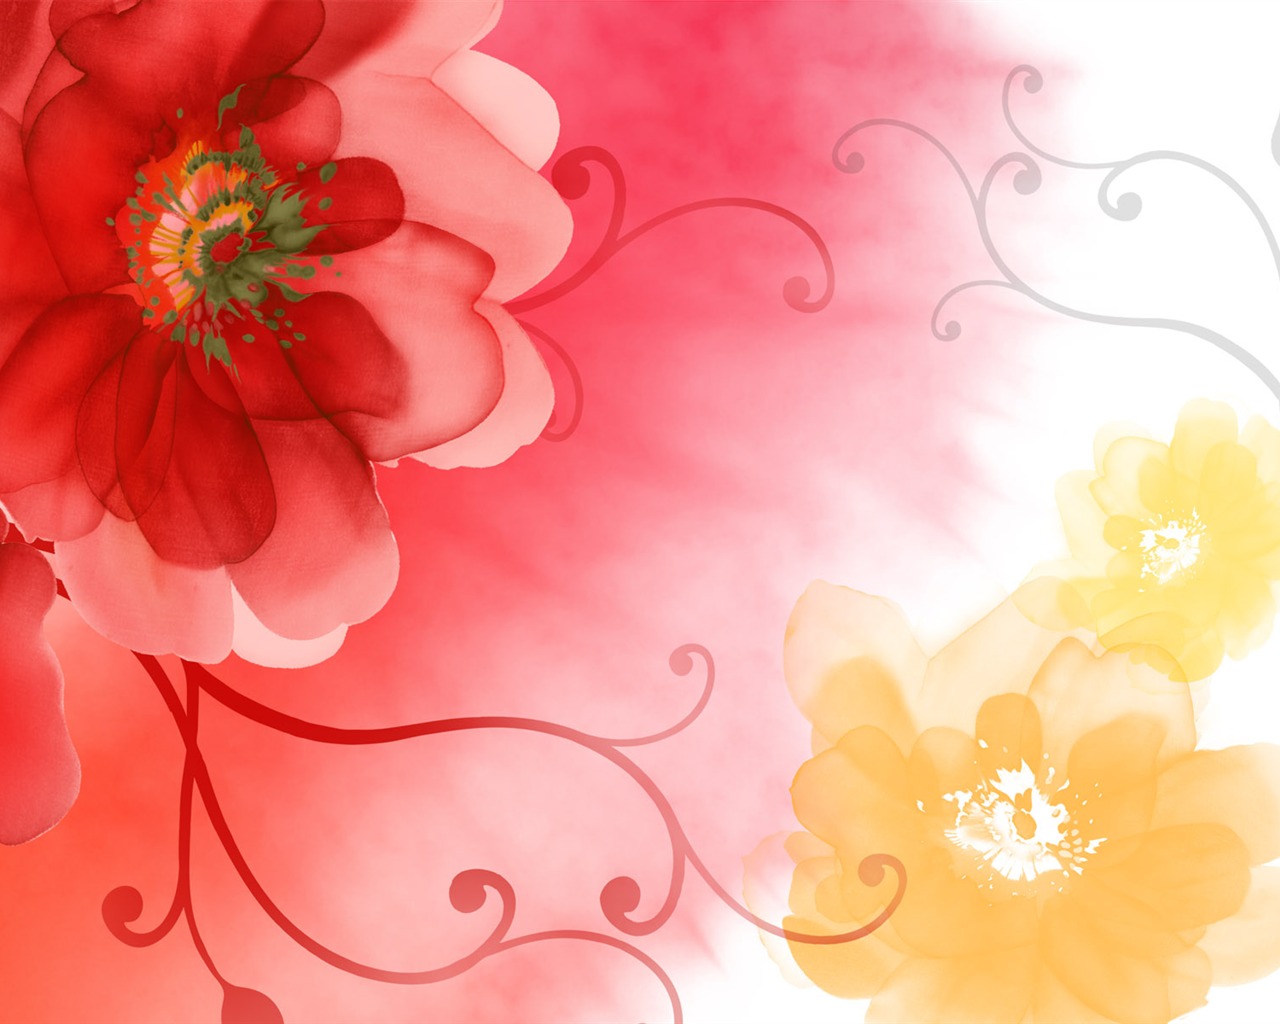 Synthetic Flower Wallpapers (1) #1 - 1280x1024